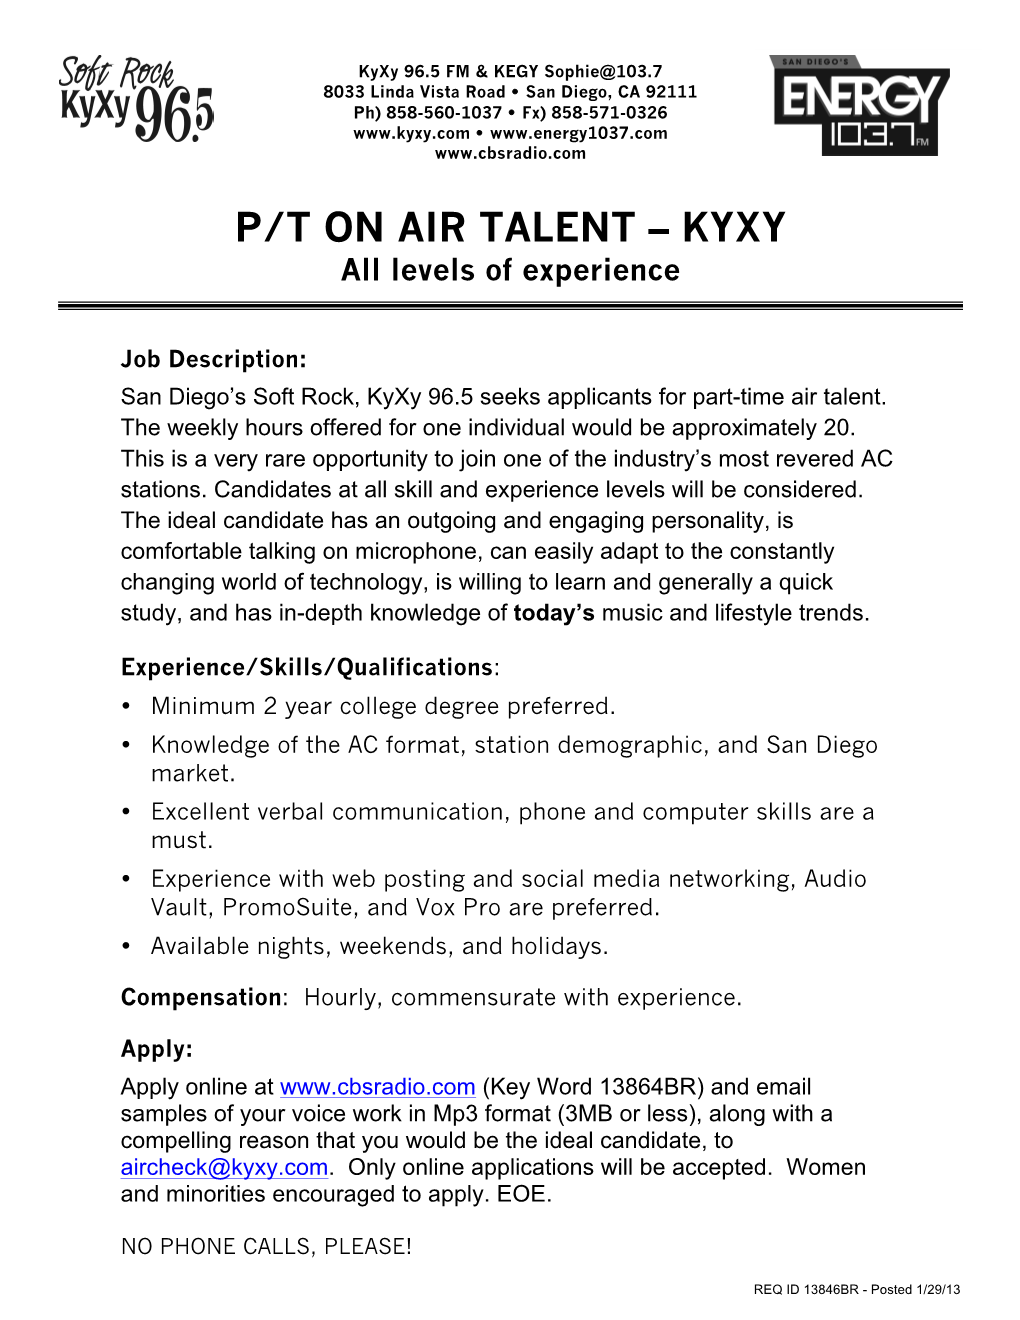 2013 KYXY Air Talent (PT)